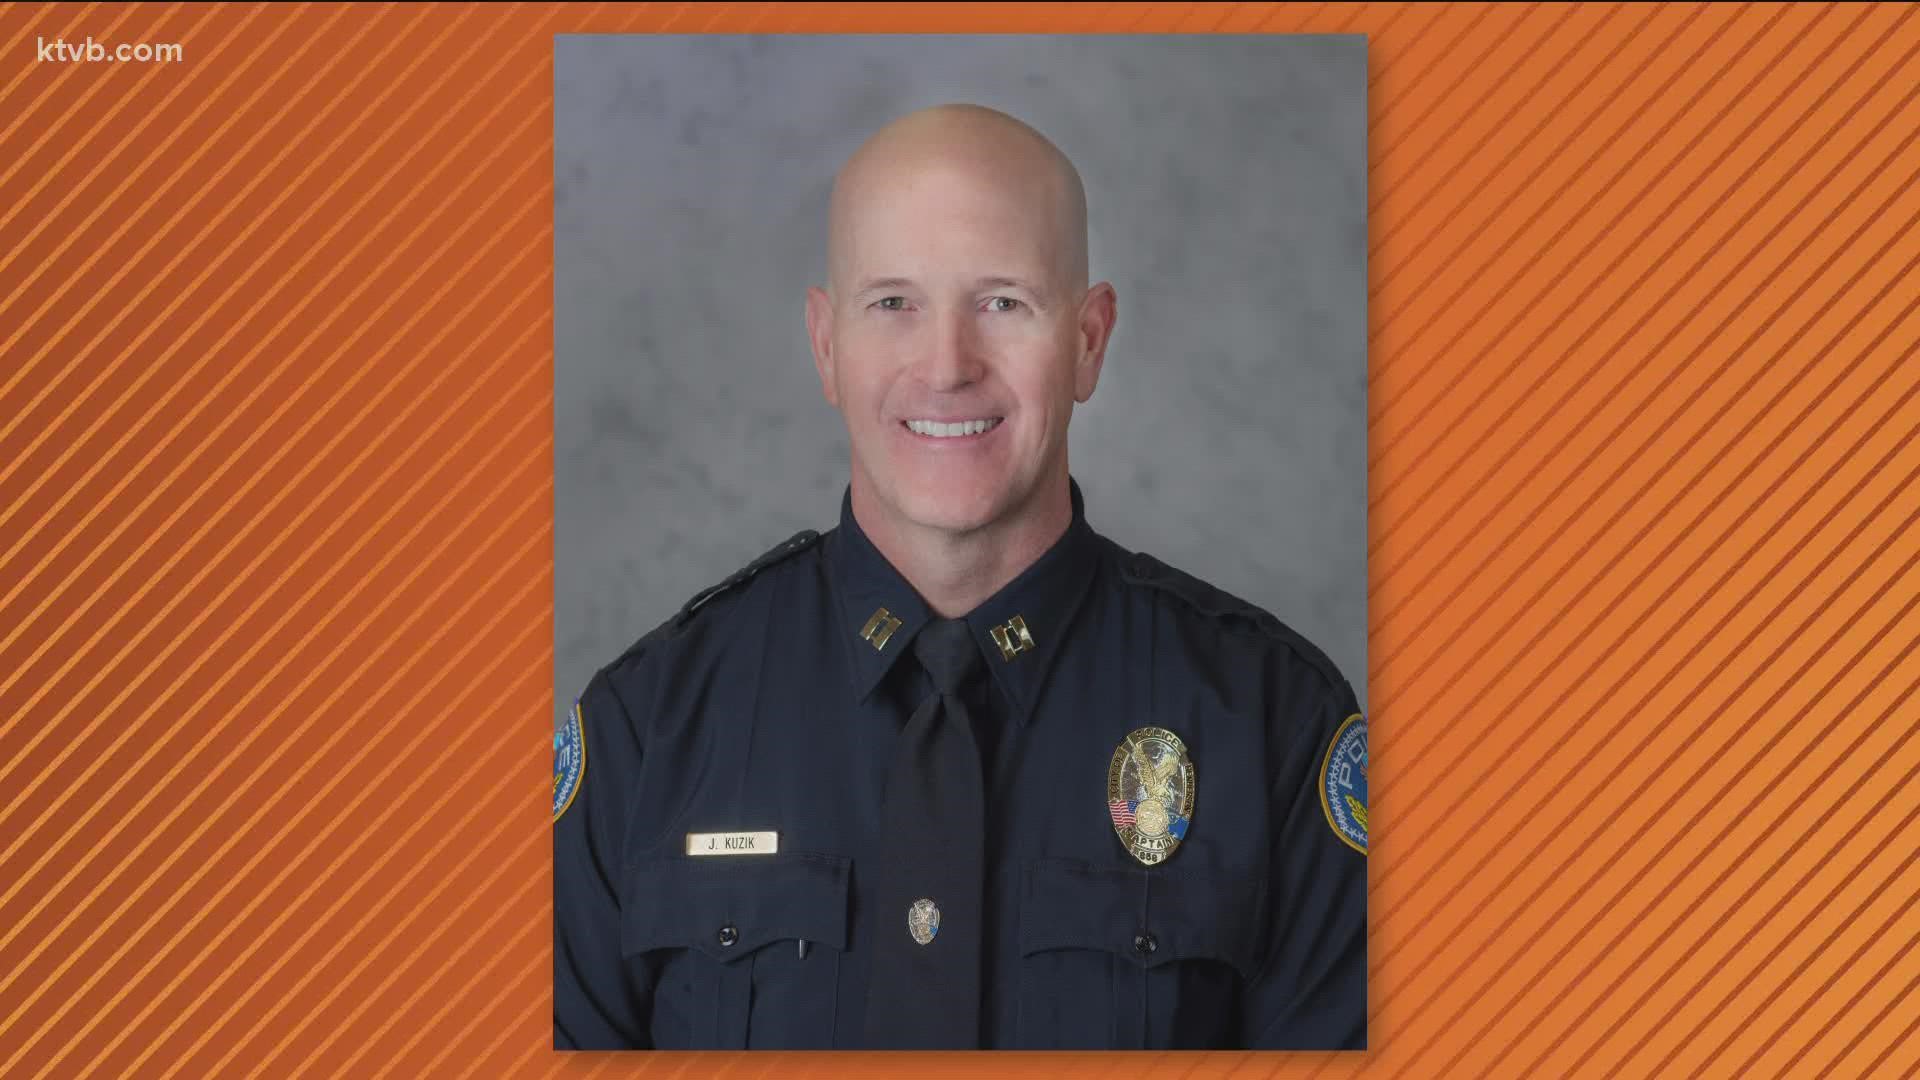 Kuzik has 25 years of law enforcement experience. He's currently a captain with the Henderson Police Department in Nevada.